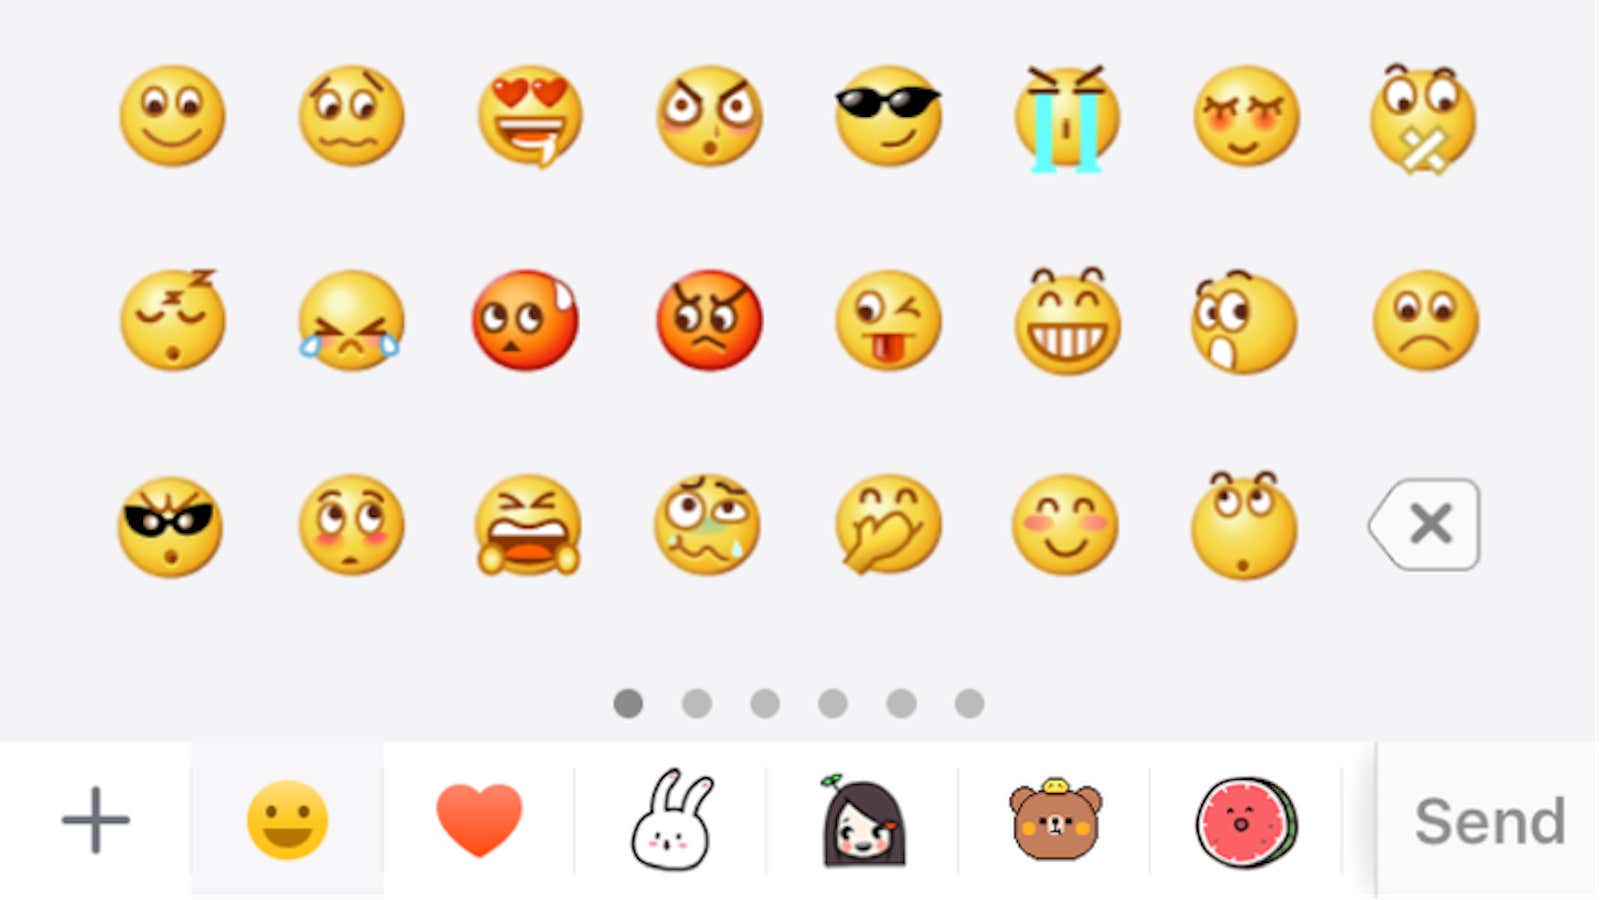 Besides the hundred-or-so official emojis that WeChat offers, it also allows users to exchange and collect stickers and gifs.